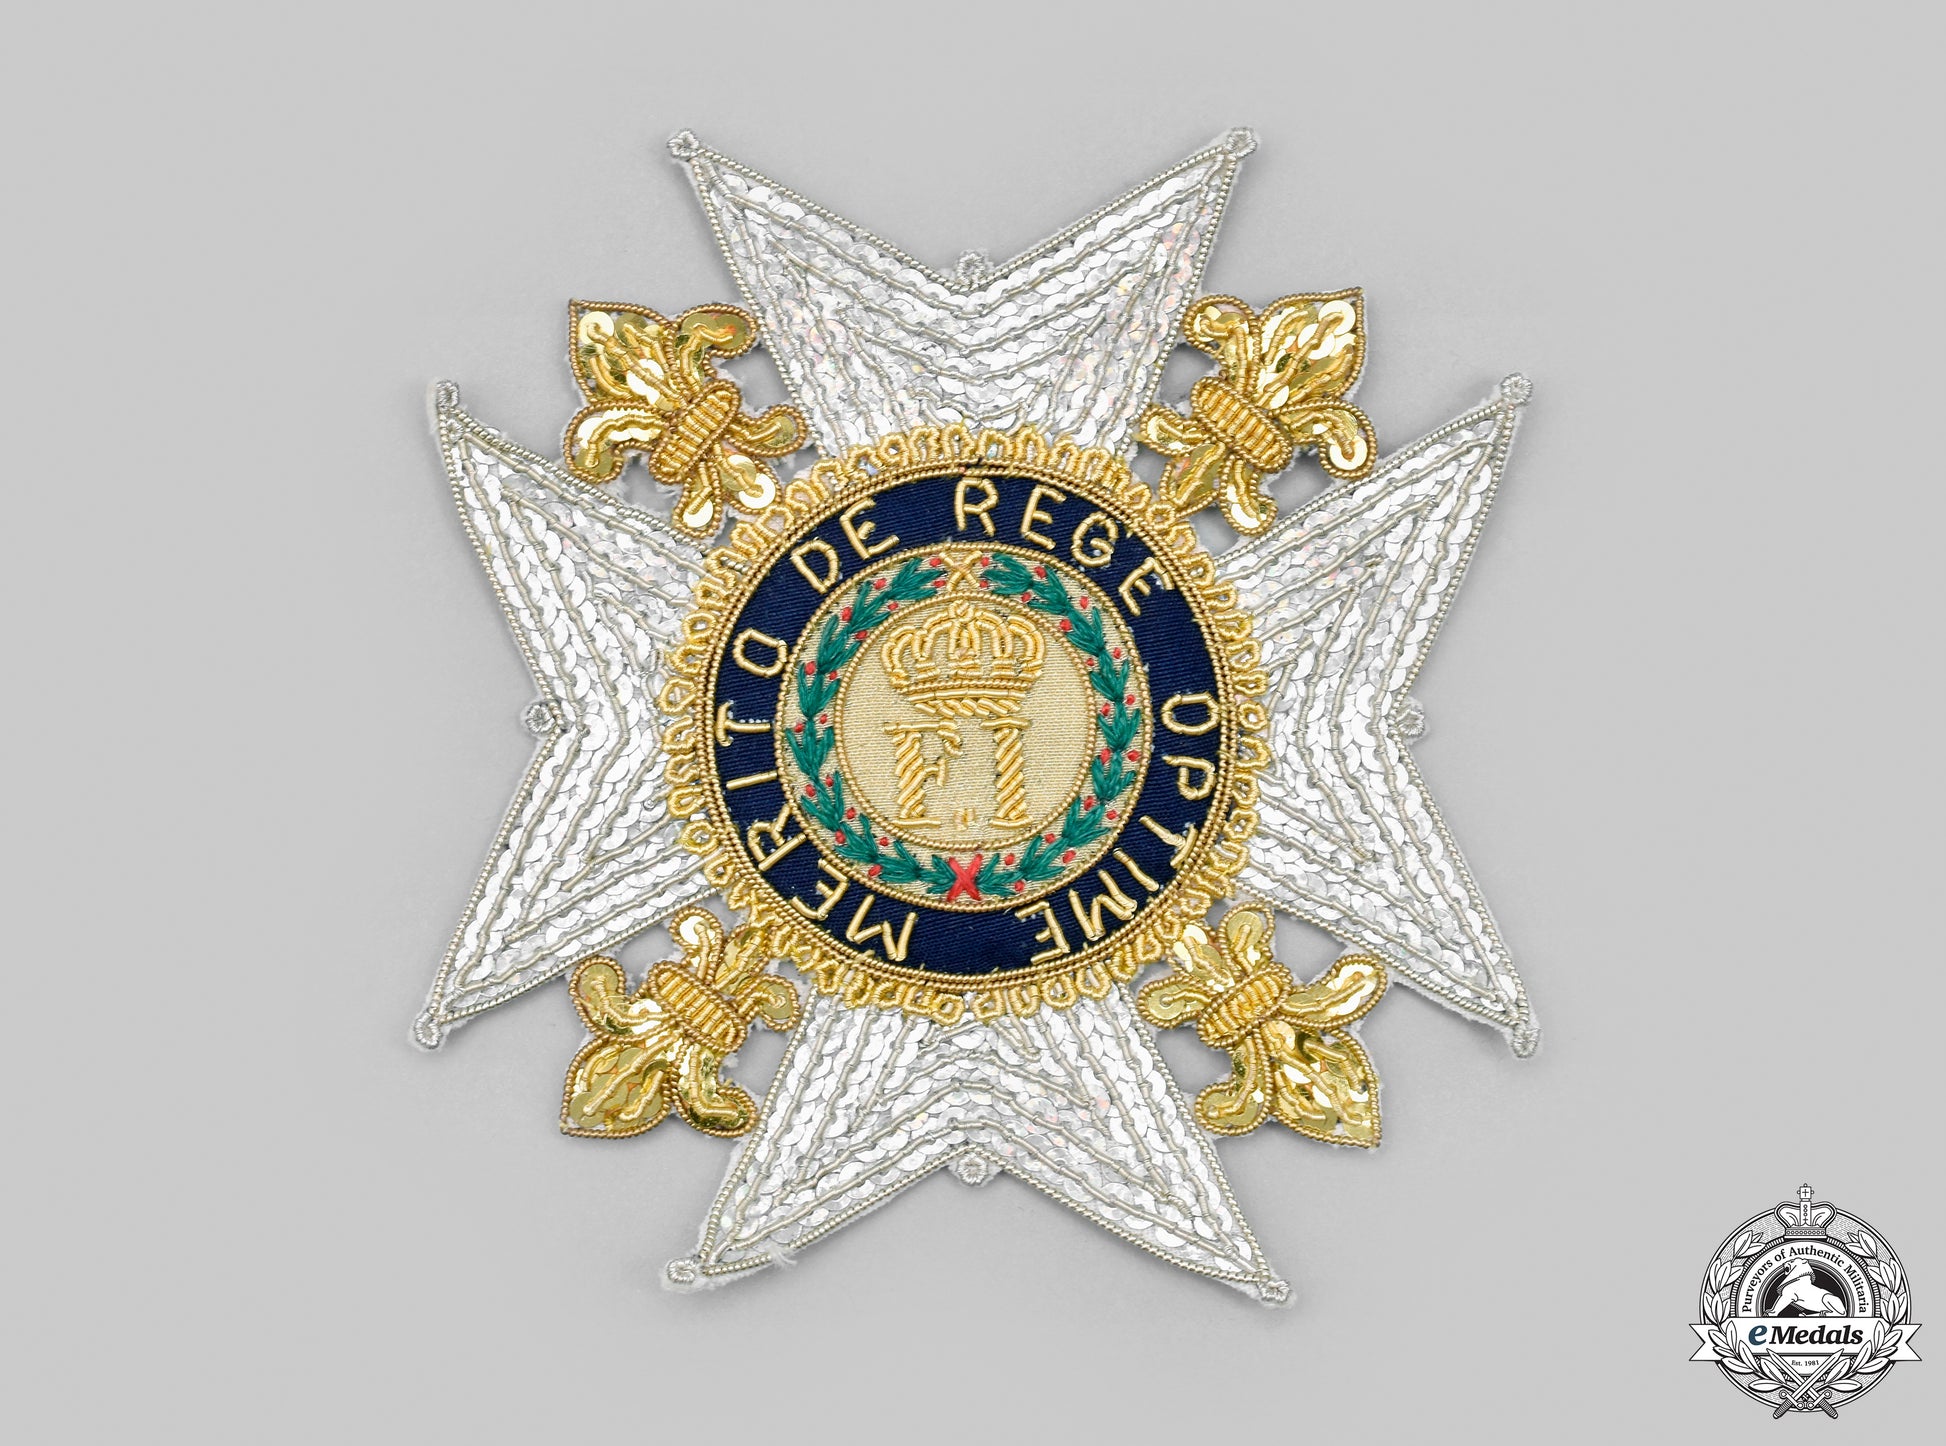 italy,_kingdom_of_the_two_sicilies._a_royal_order_of_francis_i_embroidered_breast_badge,_modern_issue_c.1975_cic_2021_190_mnc9807_1